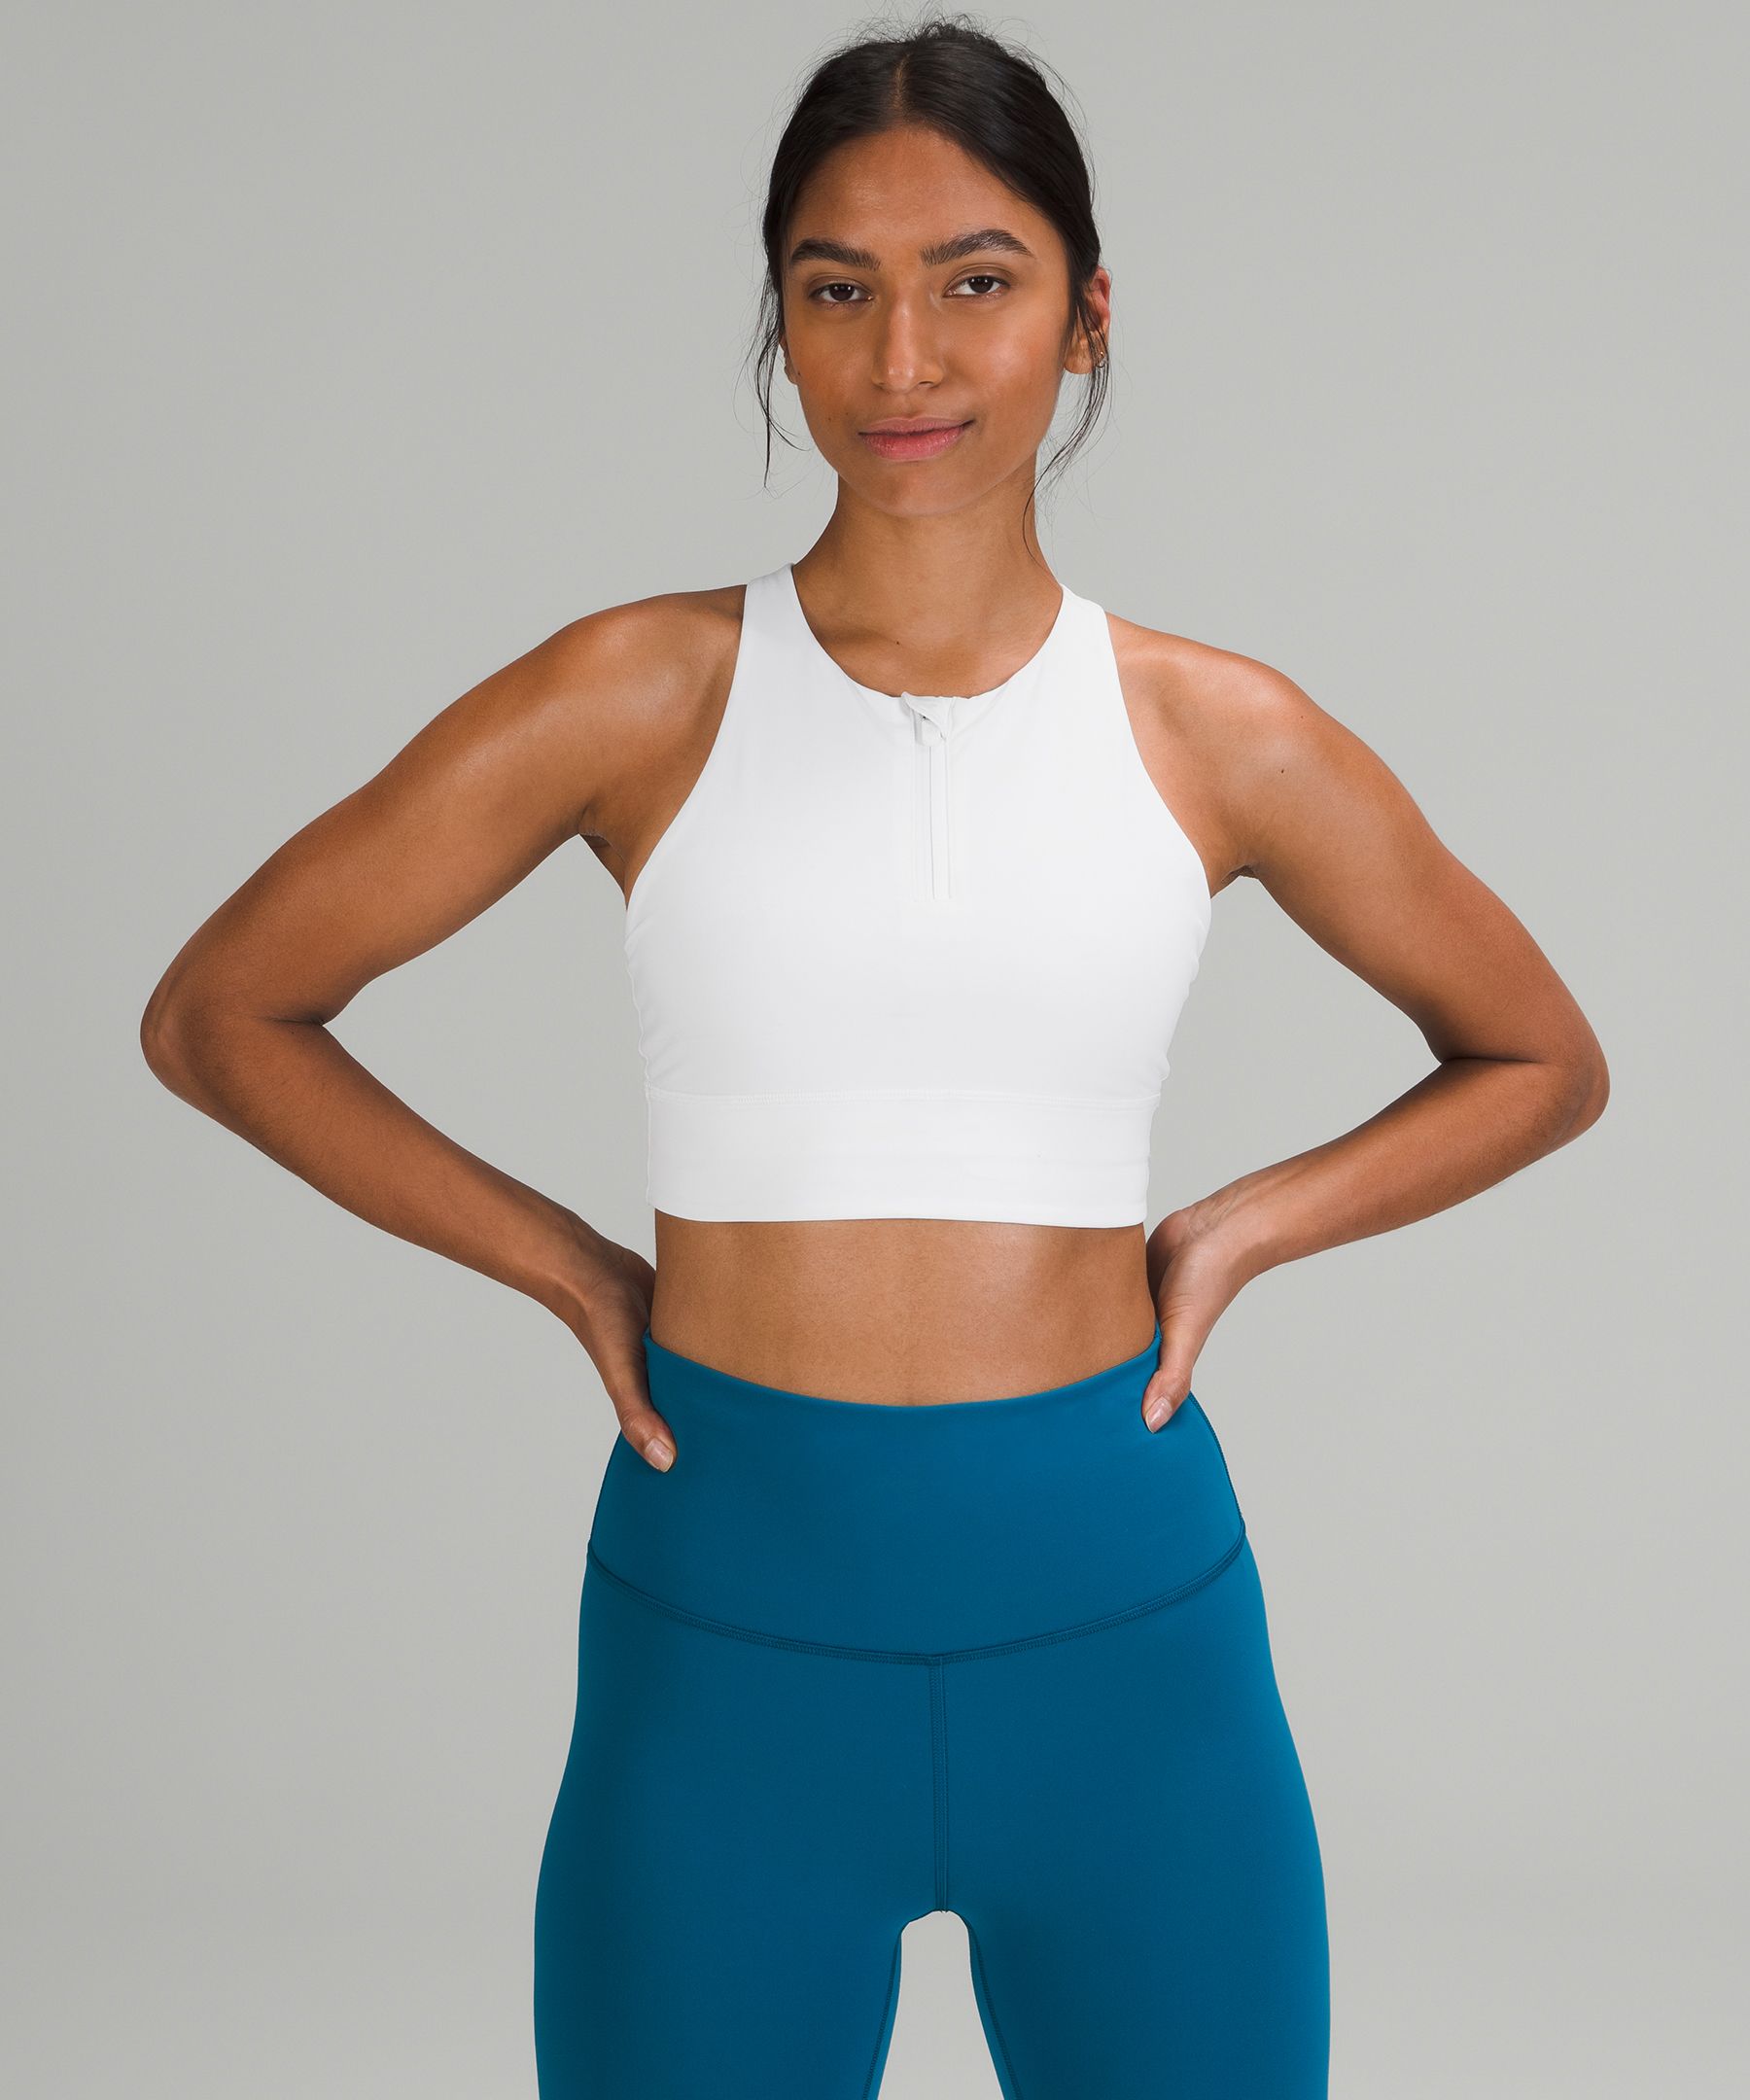 special offers & promotions here NEW Lululemon Energy Shine Sport